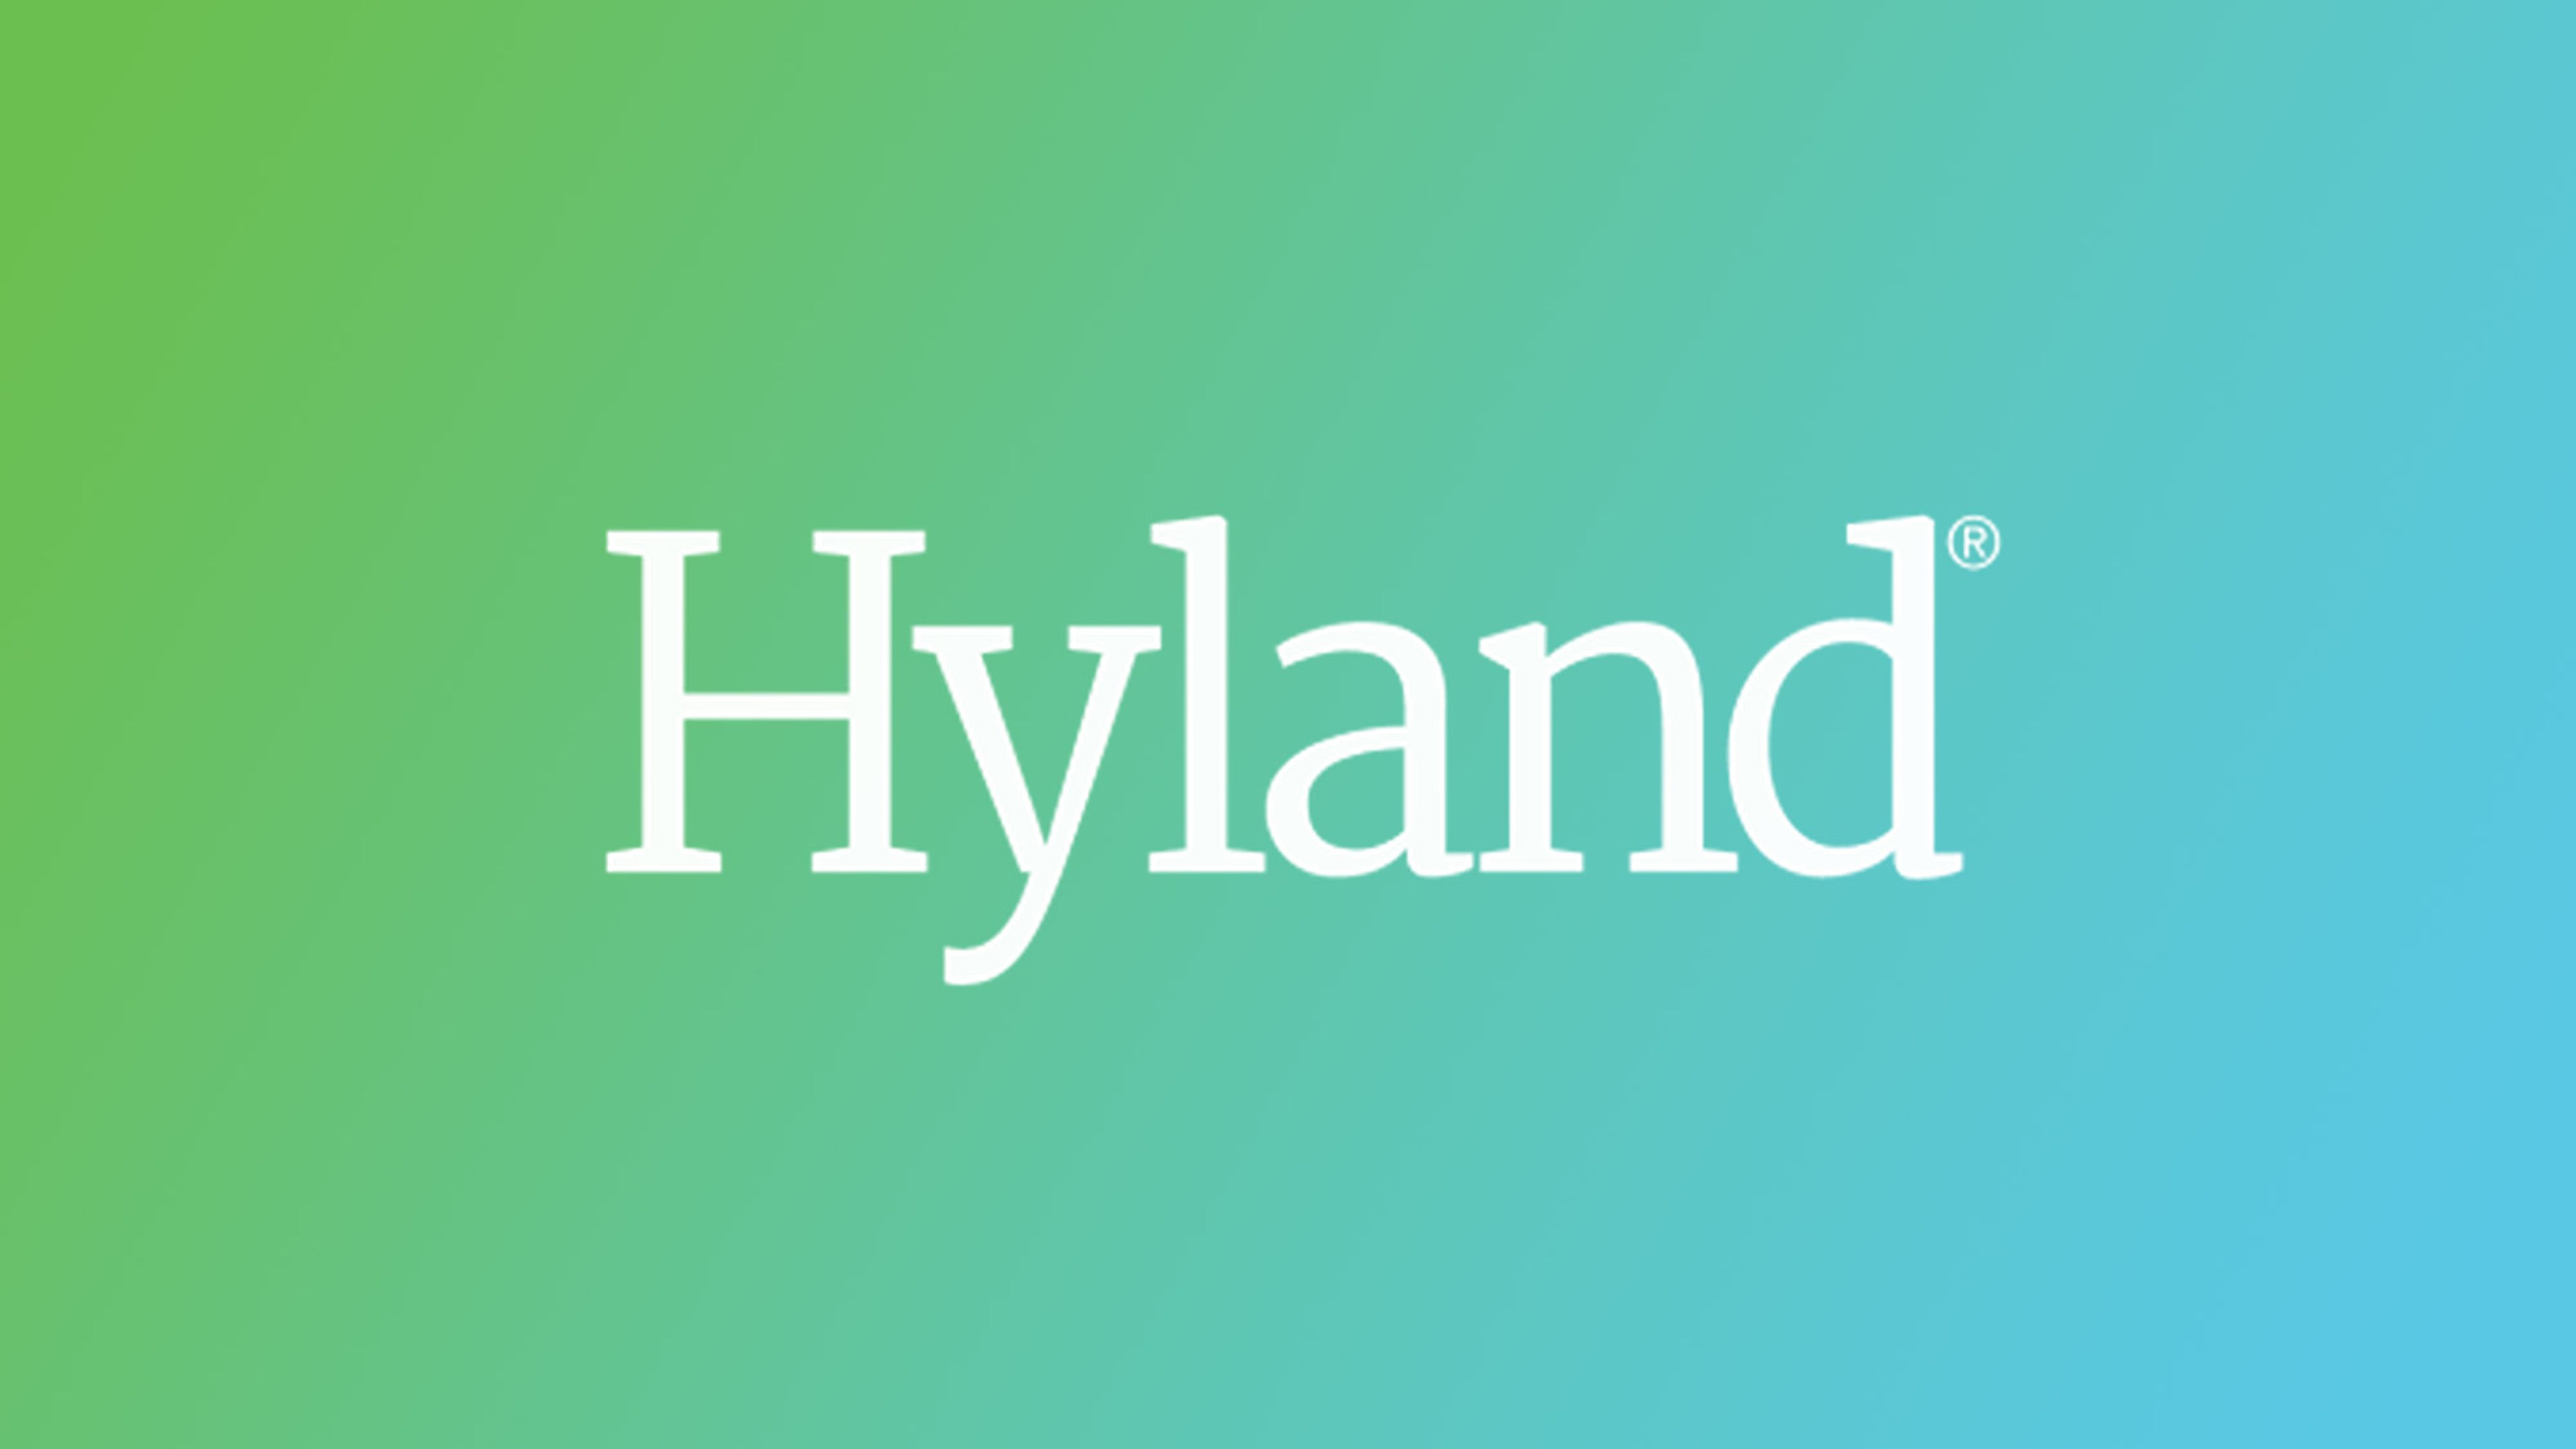 Featured image of Hyland logo against a blended background